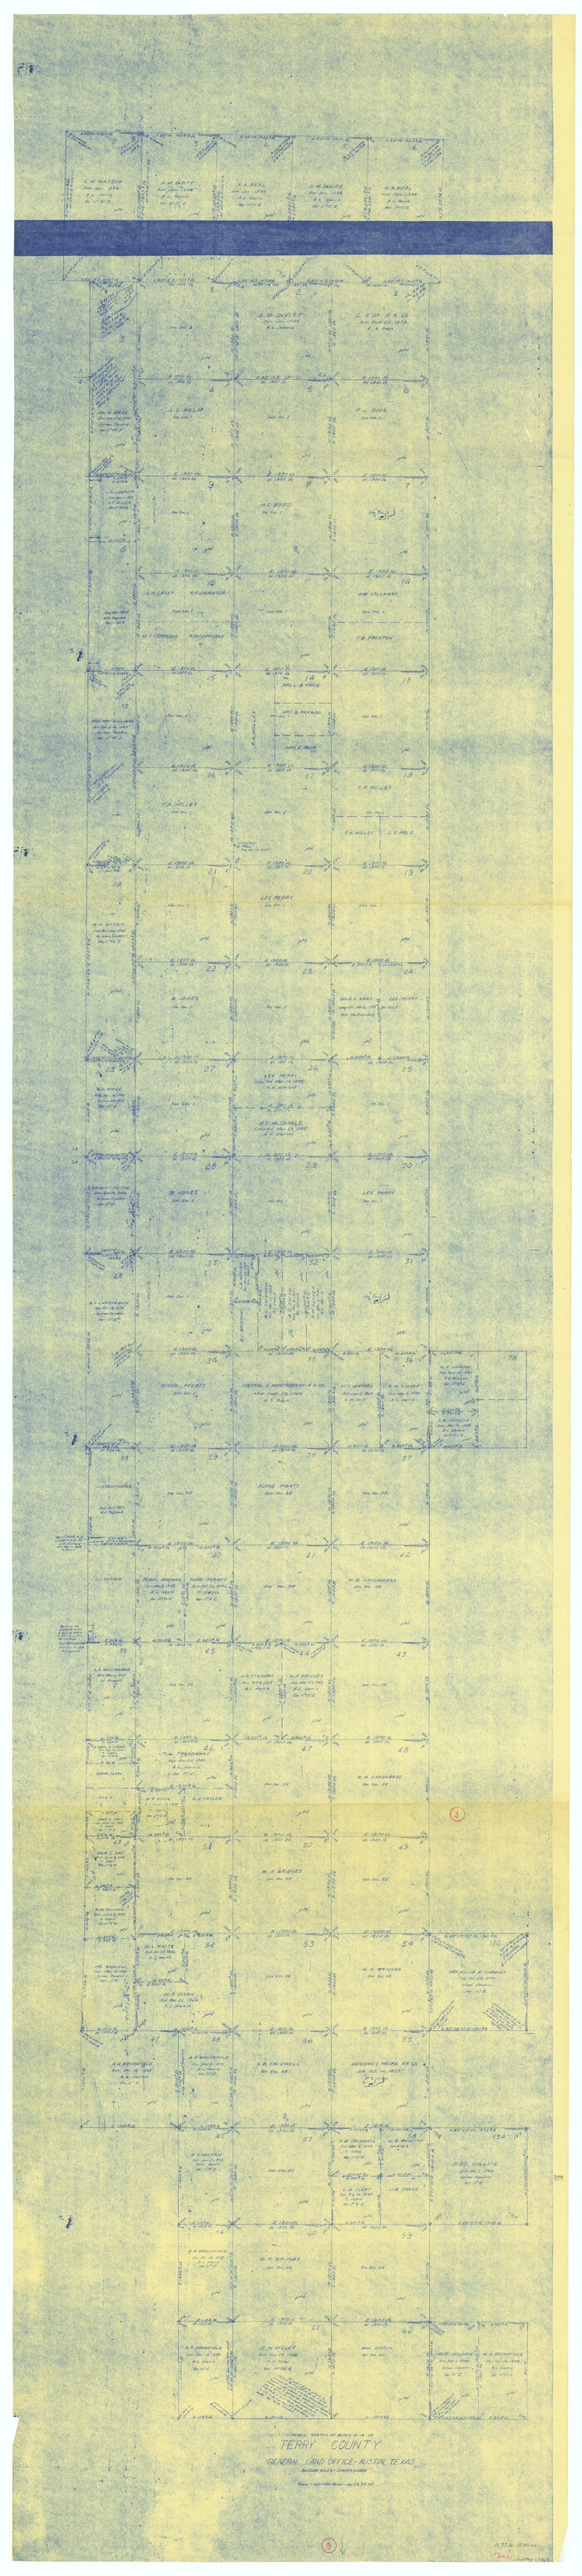 62108, Terry County Working Sketch 3, General Map Collection